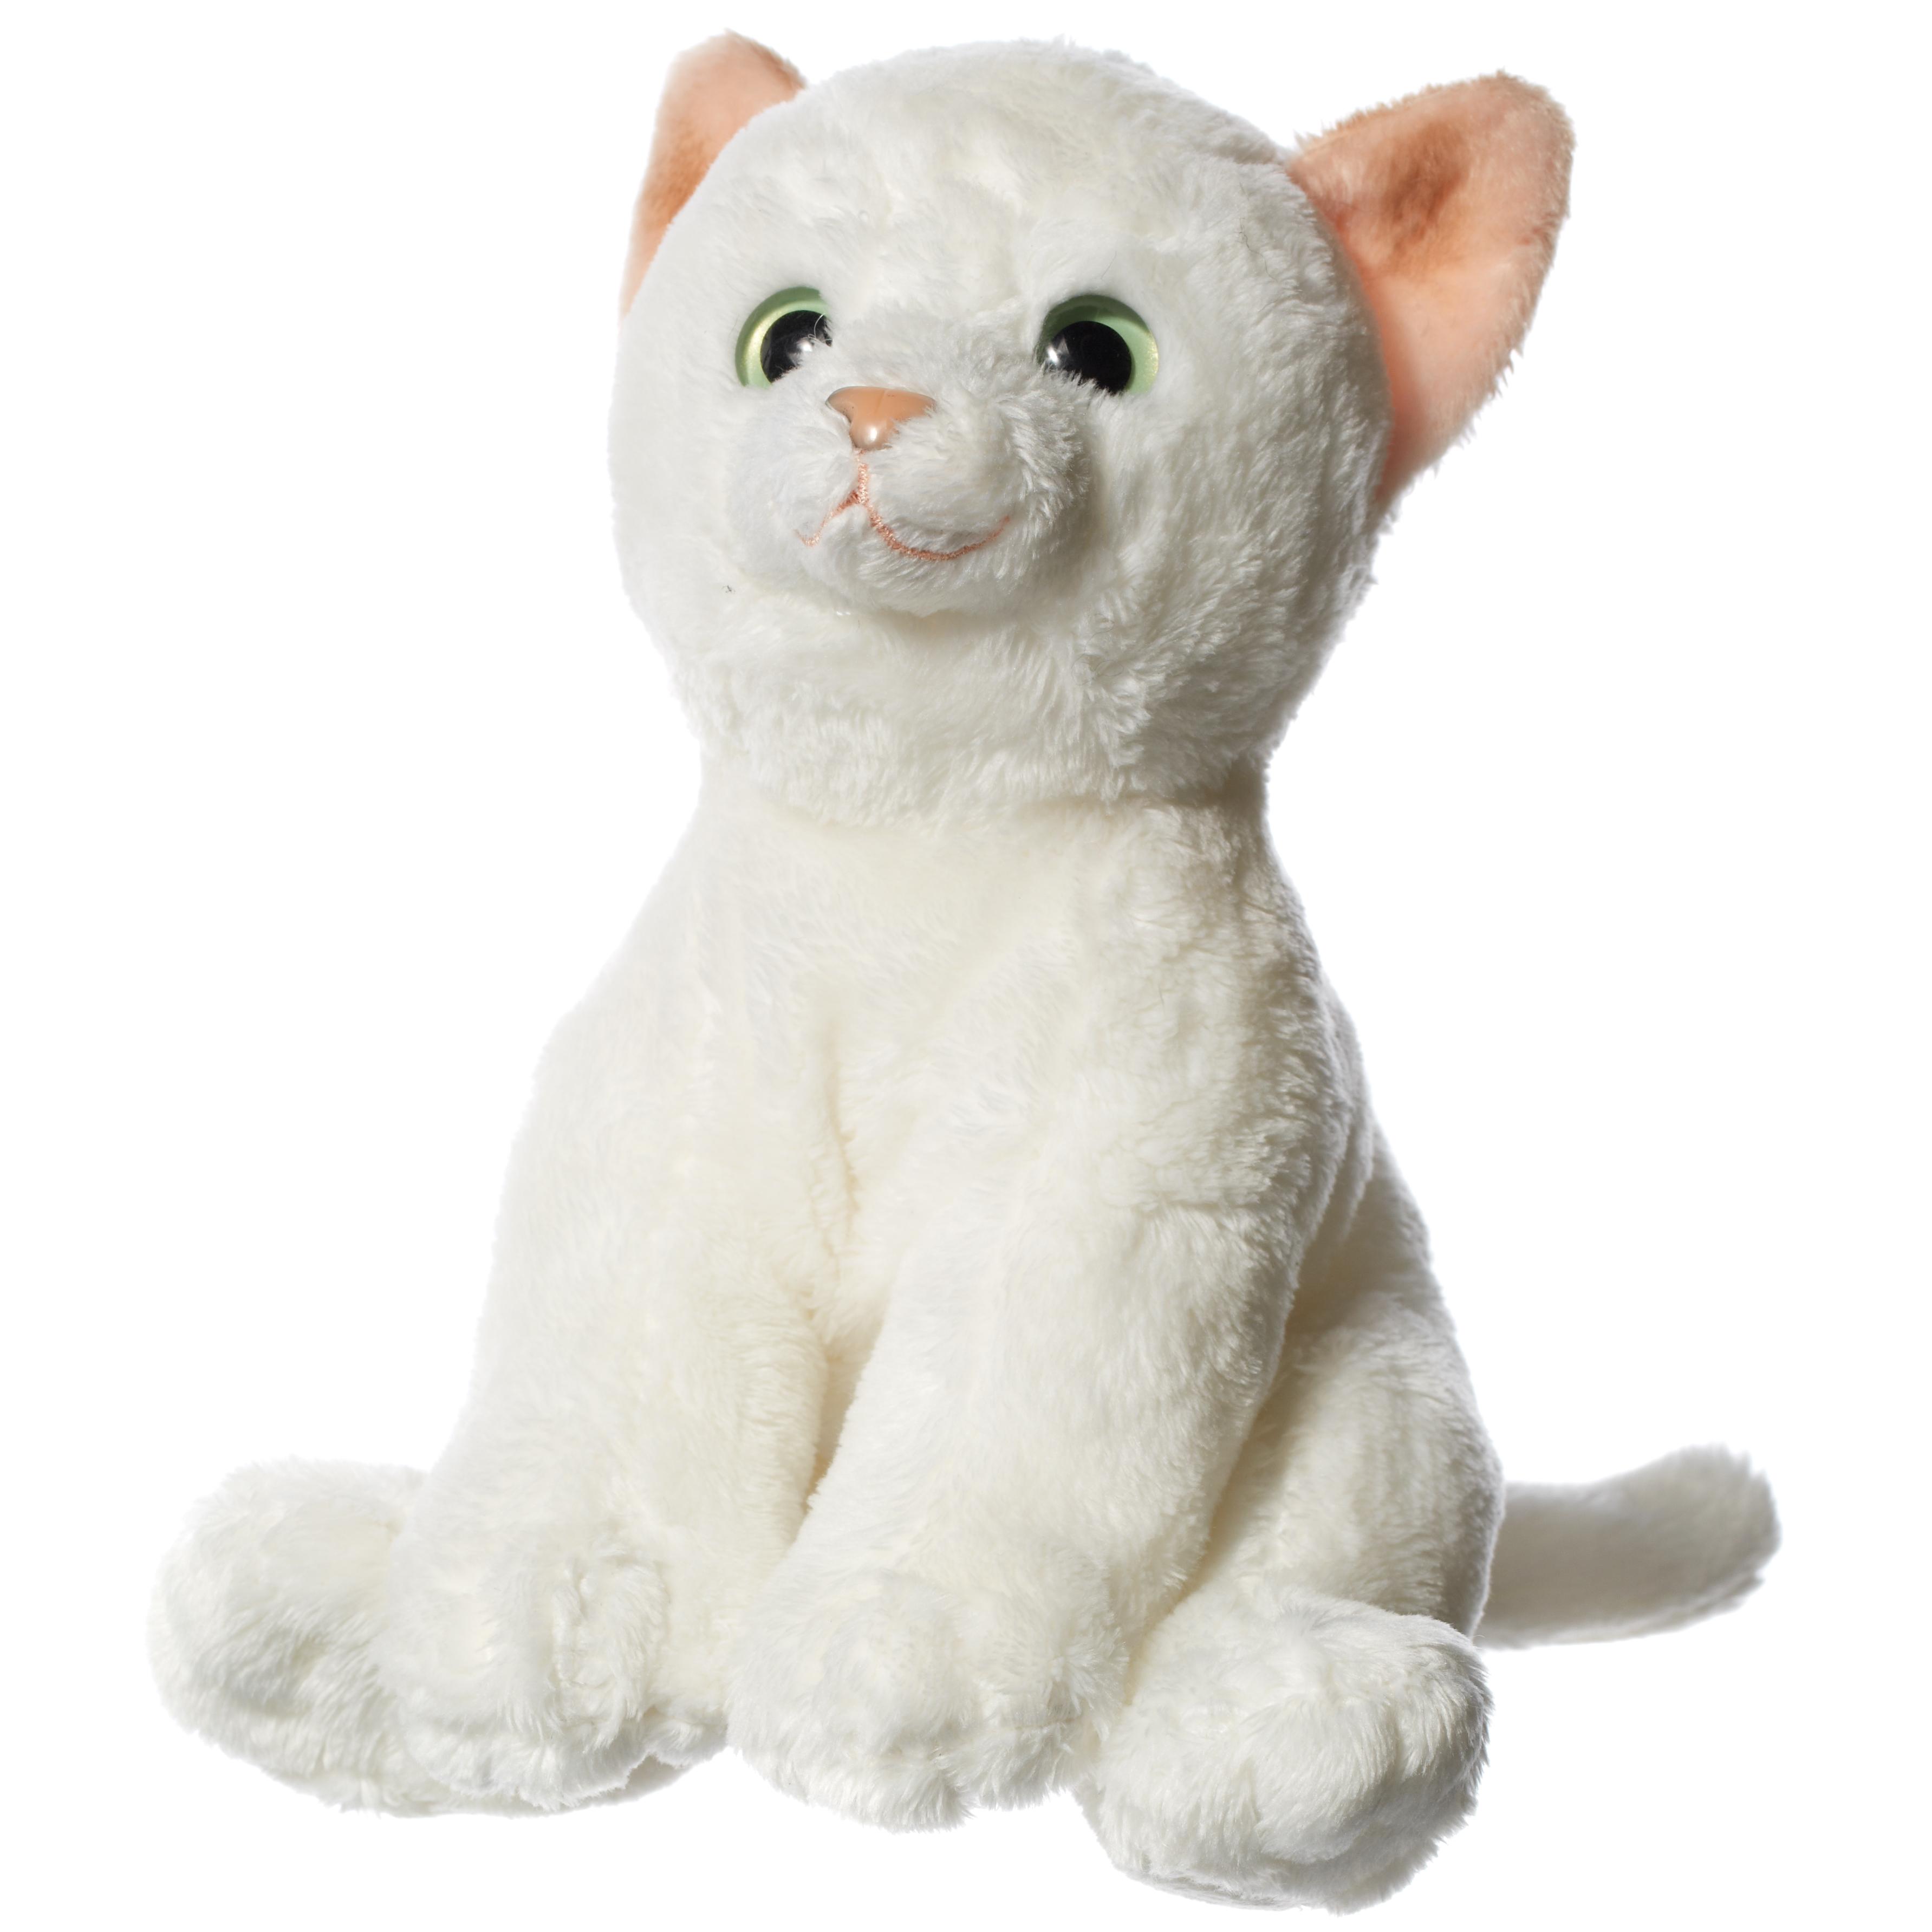 Hamleys 6-Inch White Cat Soft Toy - £9.00 - Hamleys for Toys and Games